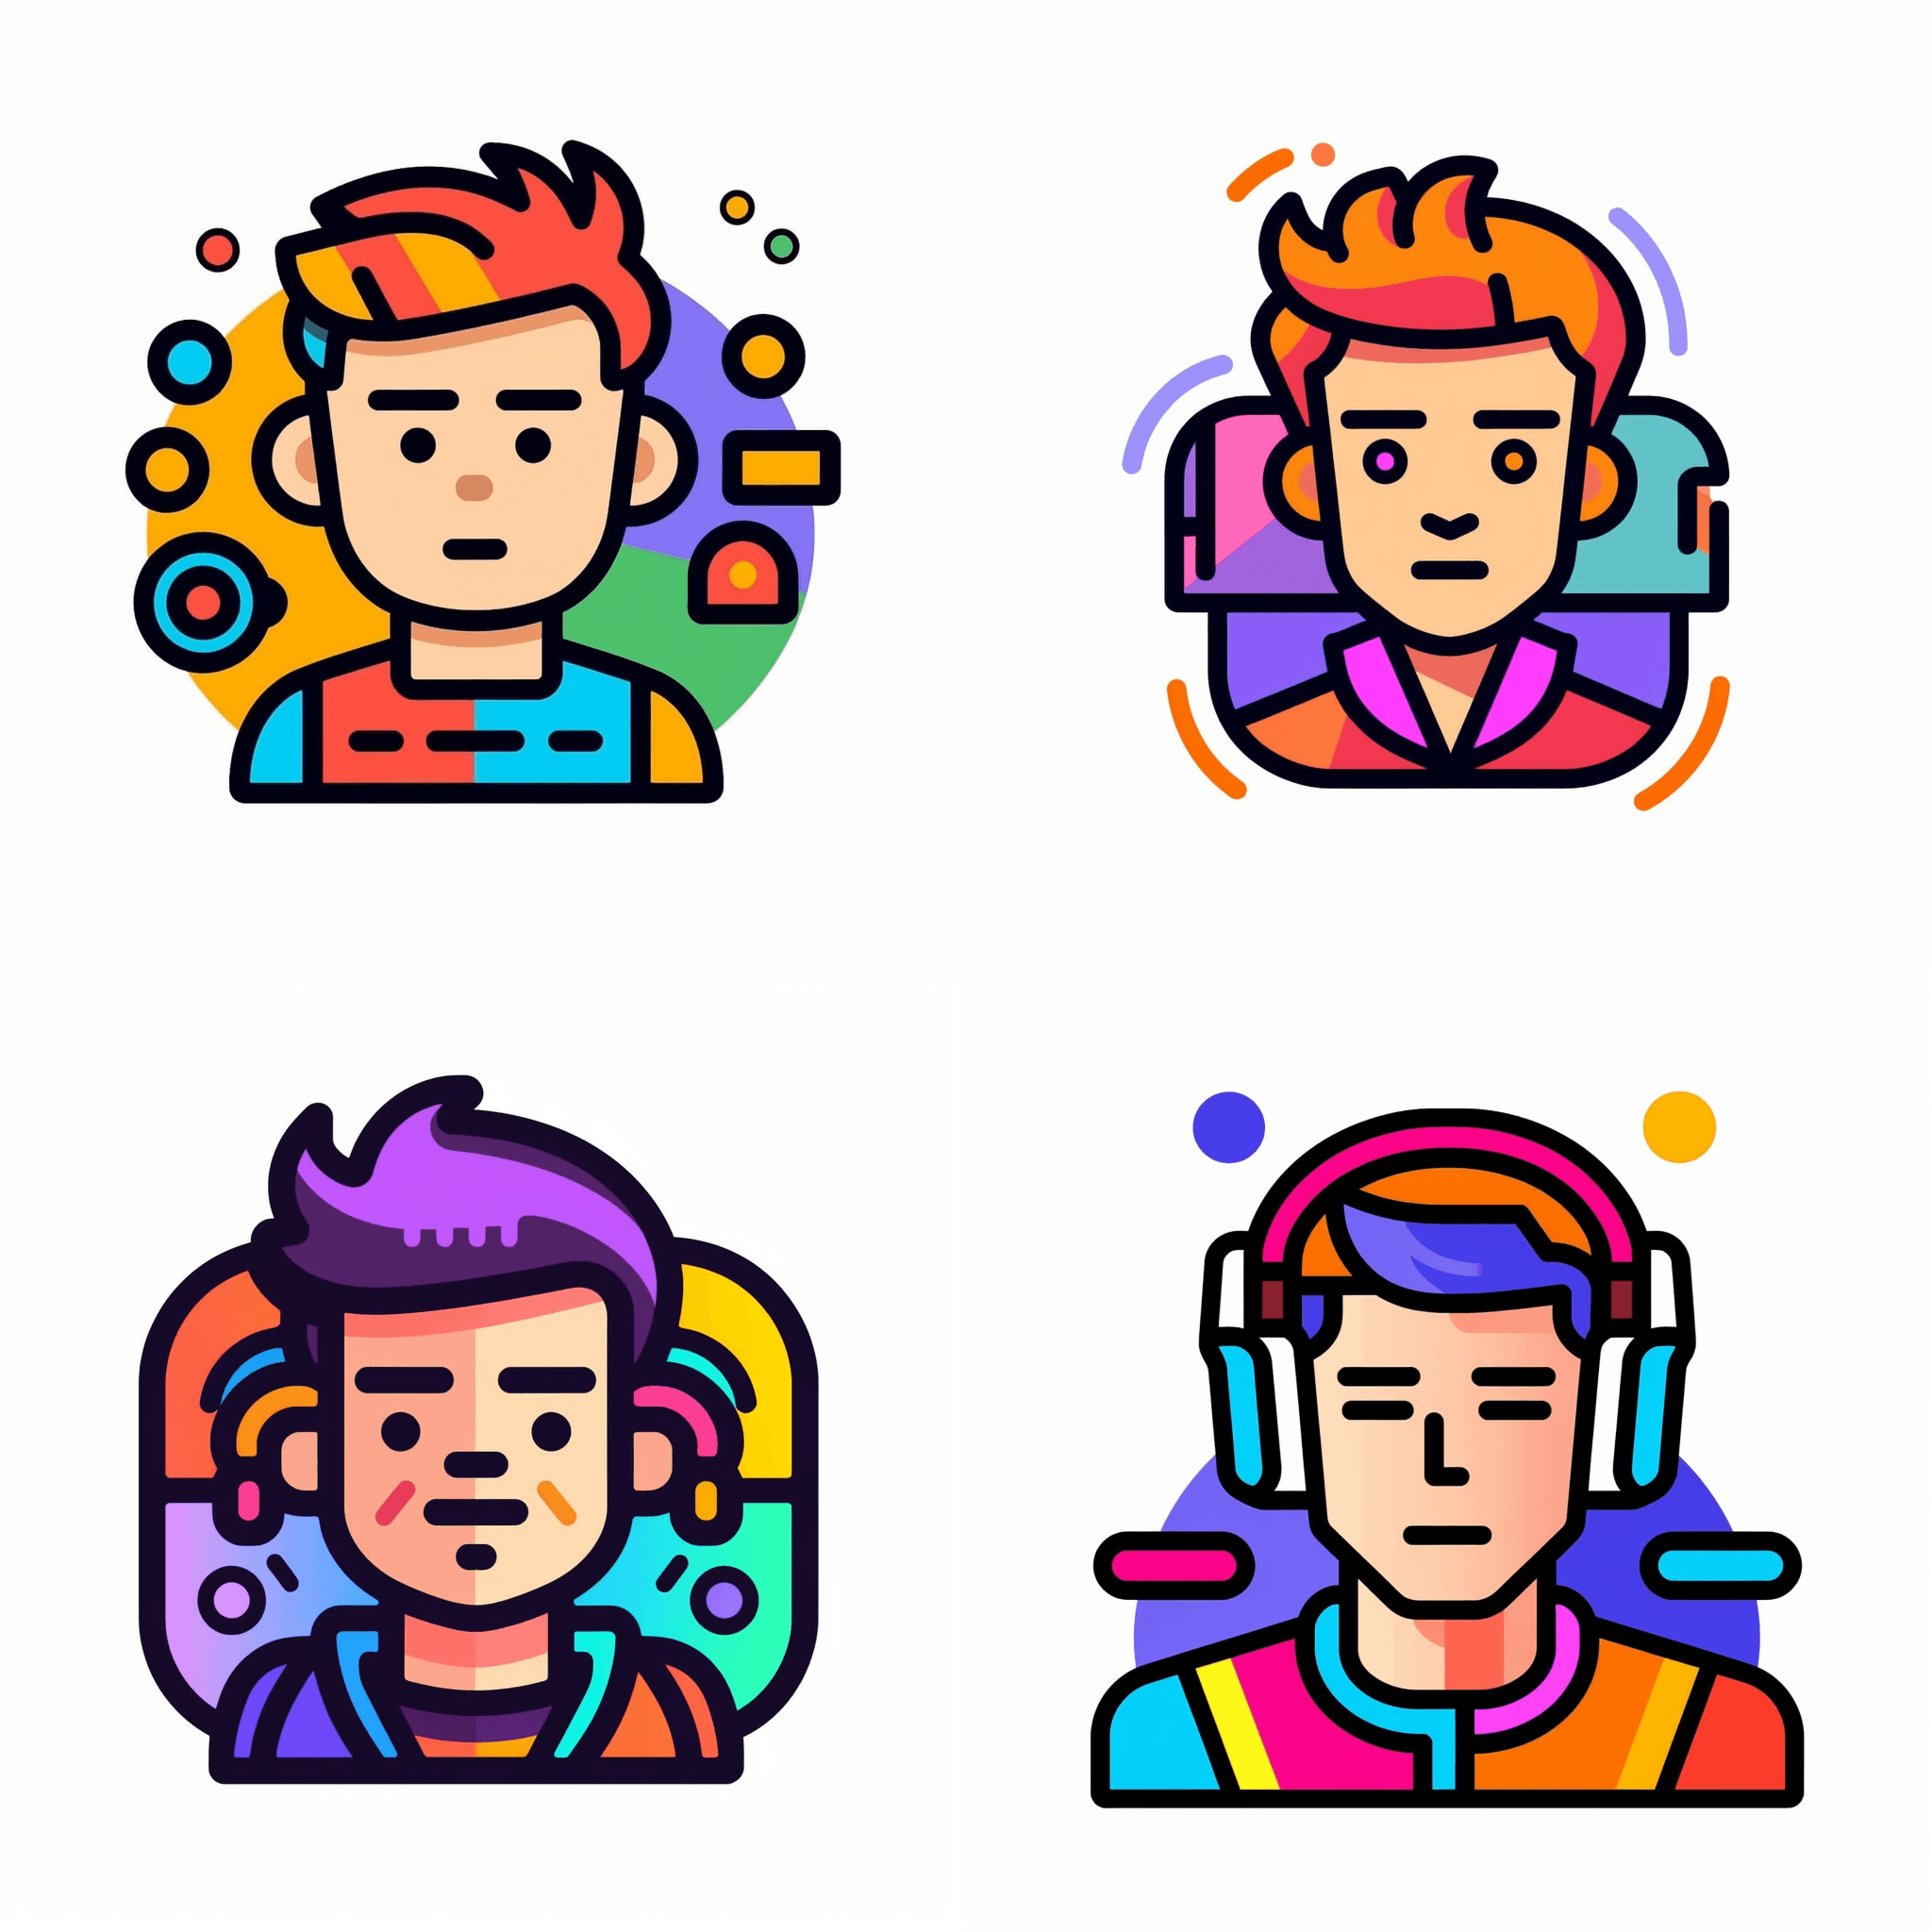 A Tech guy, cute icon avatar, colorful, rounded thick outlines, white background --no circle